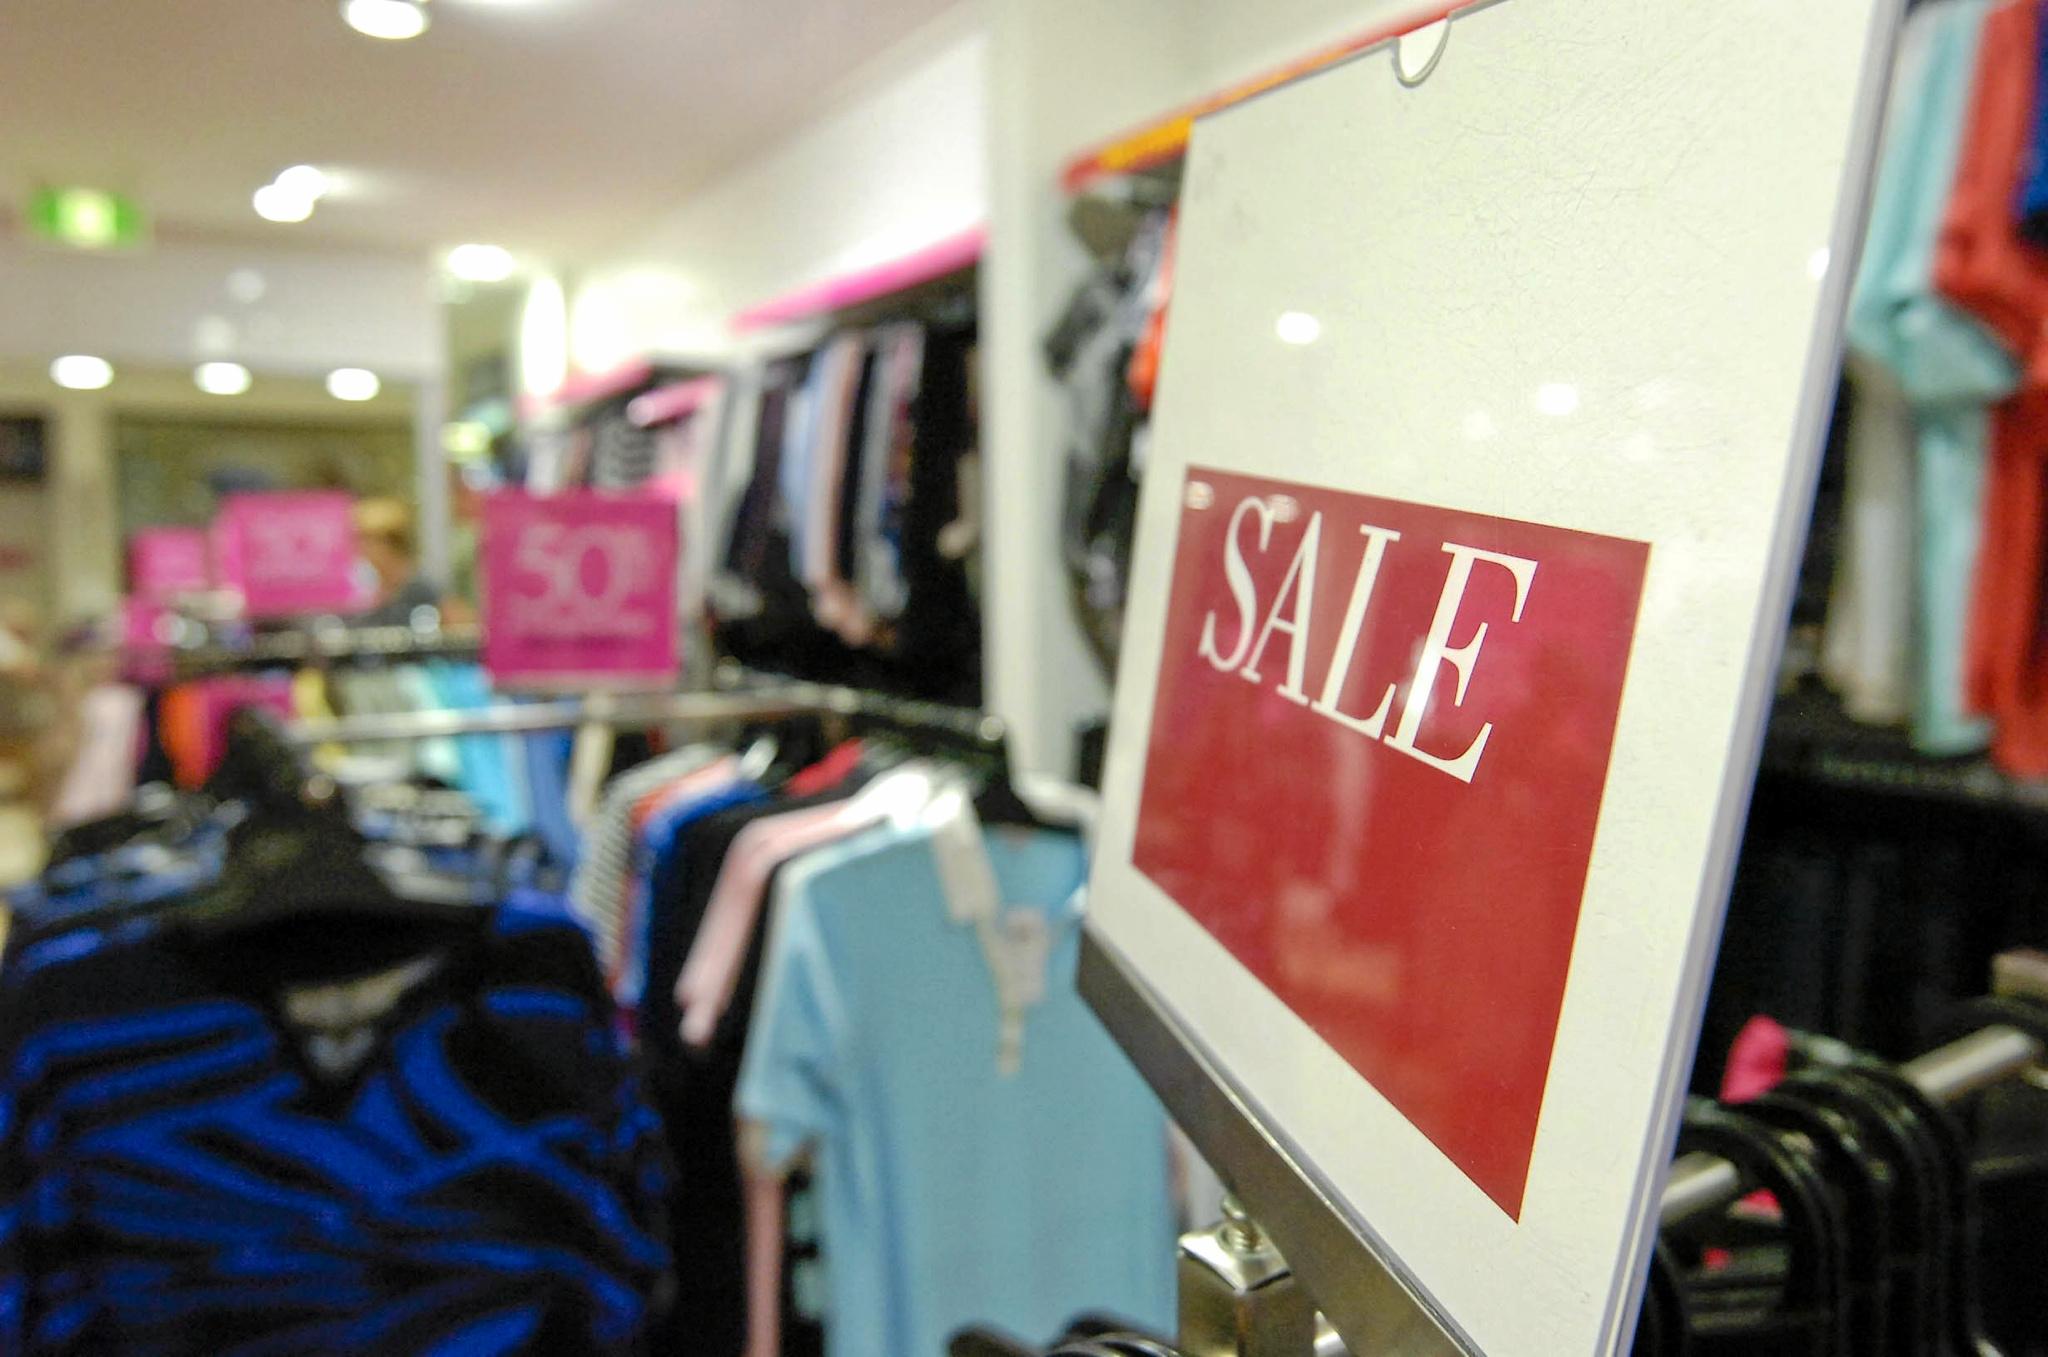 Noni B closing down sale | The Courier Mail